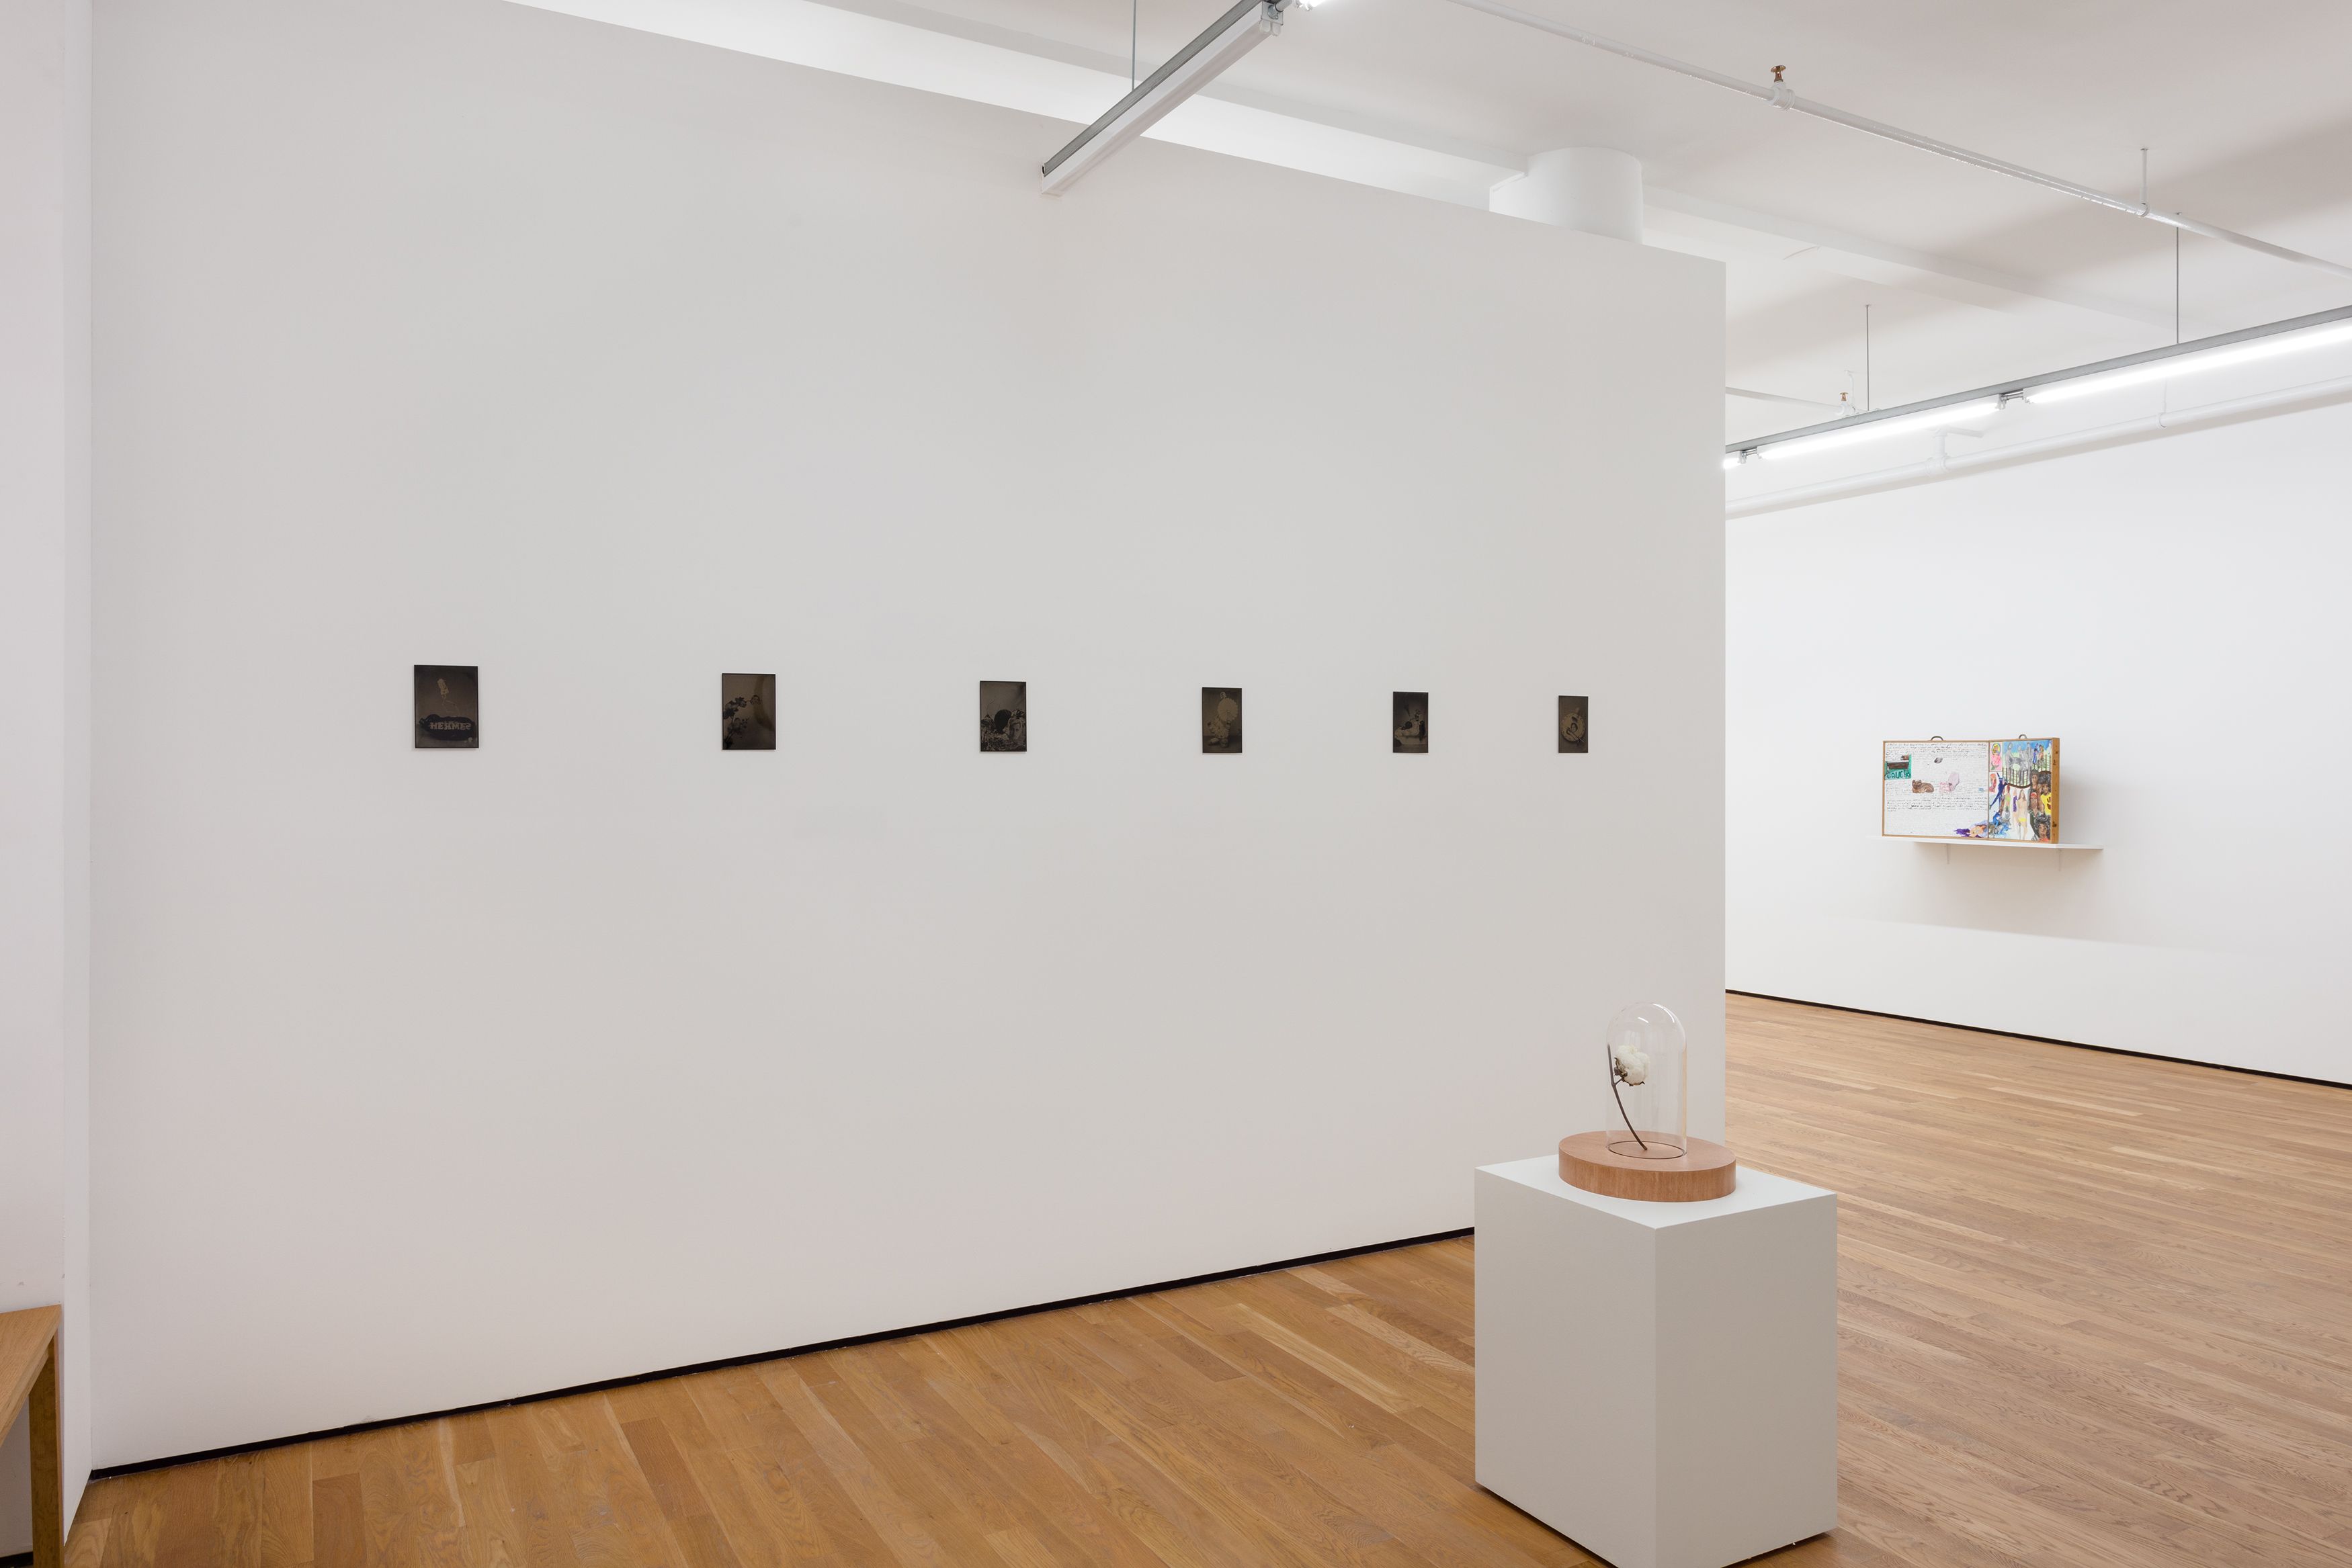 Château Shatto, installation view, Foxy Production, New York 